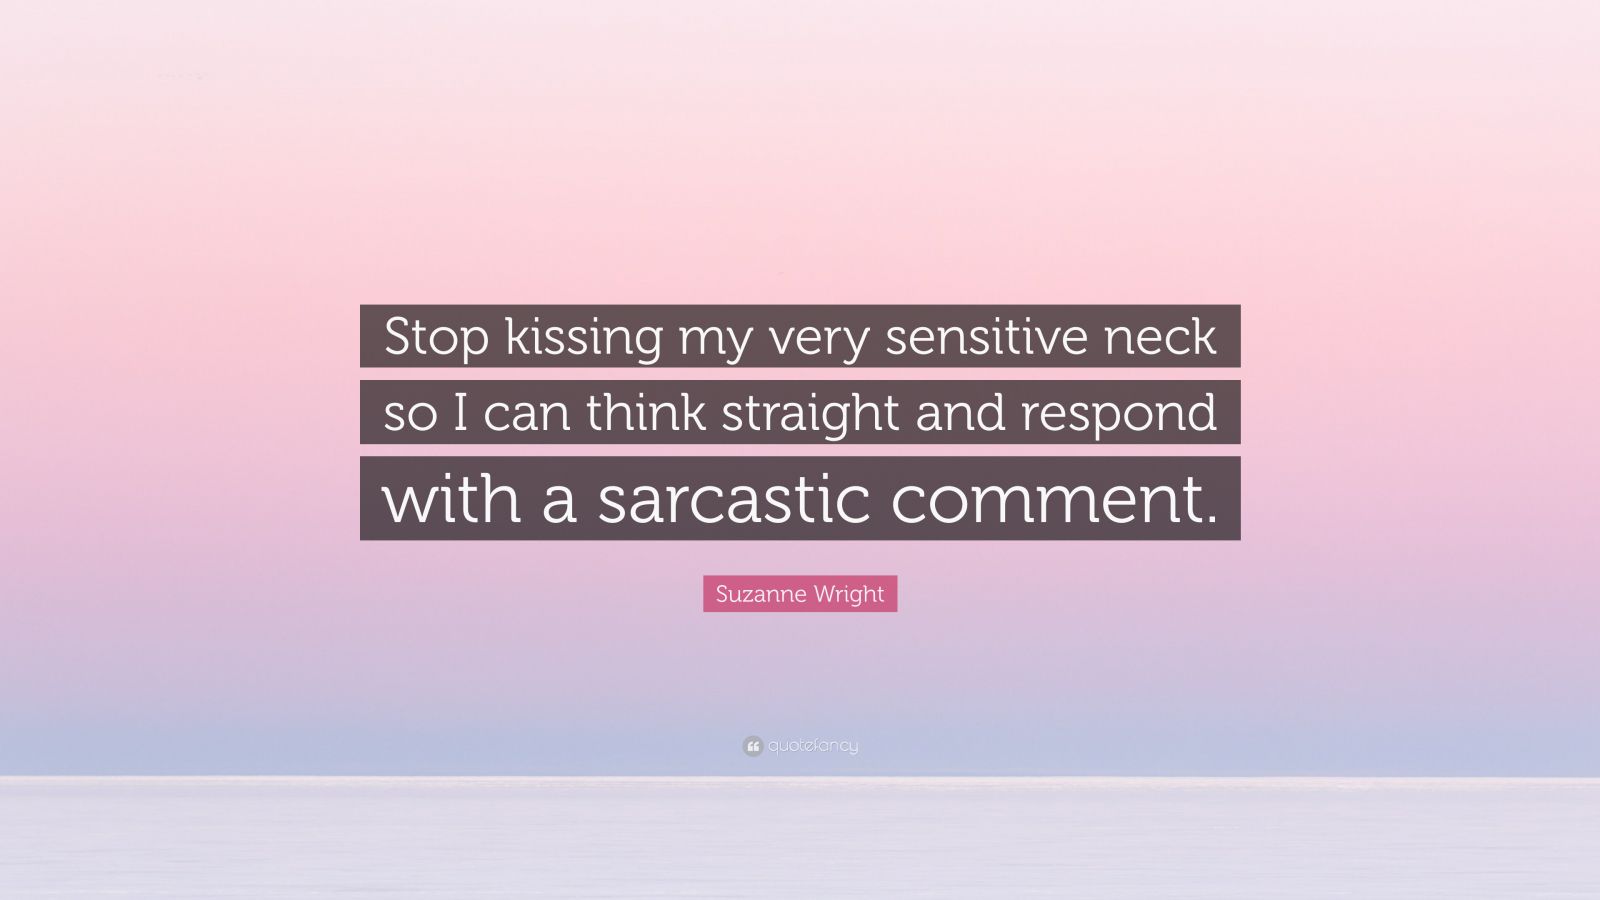 neck kissing quotes